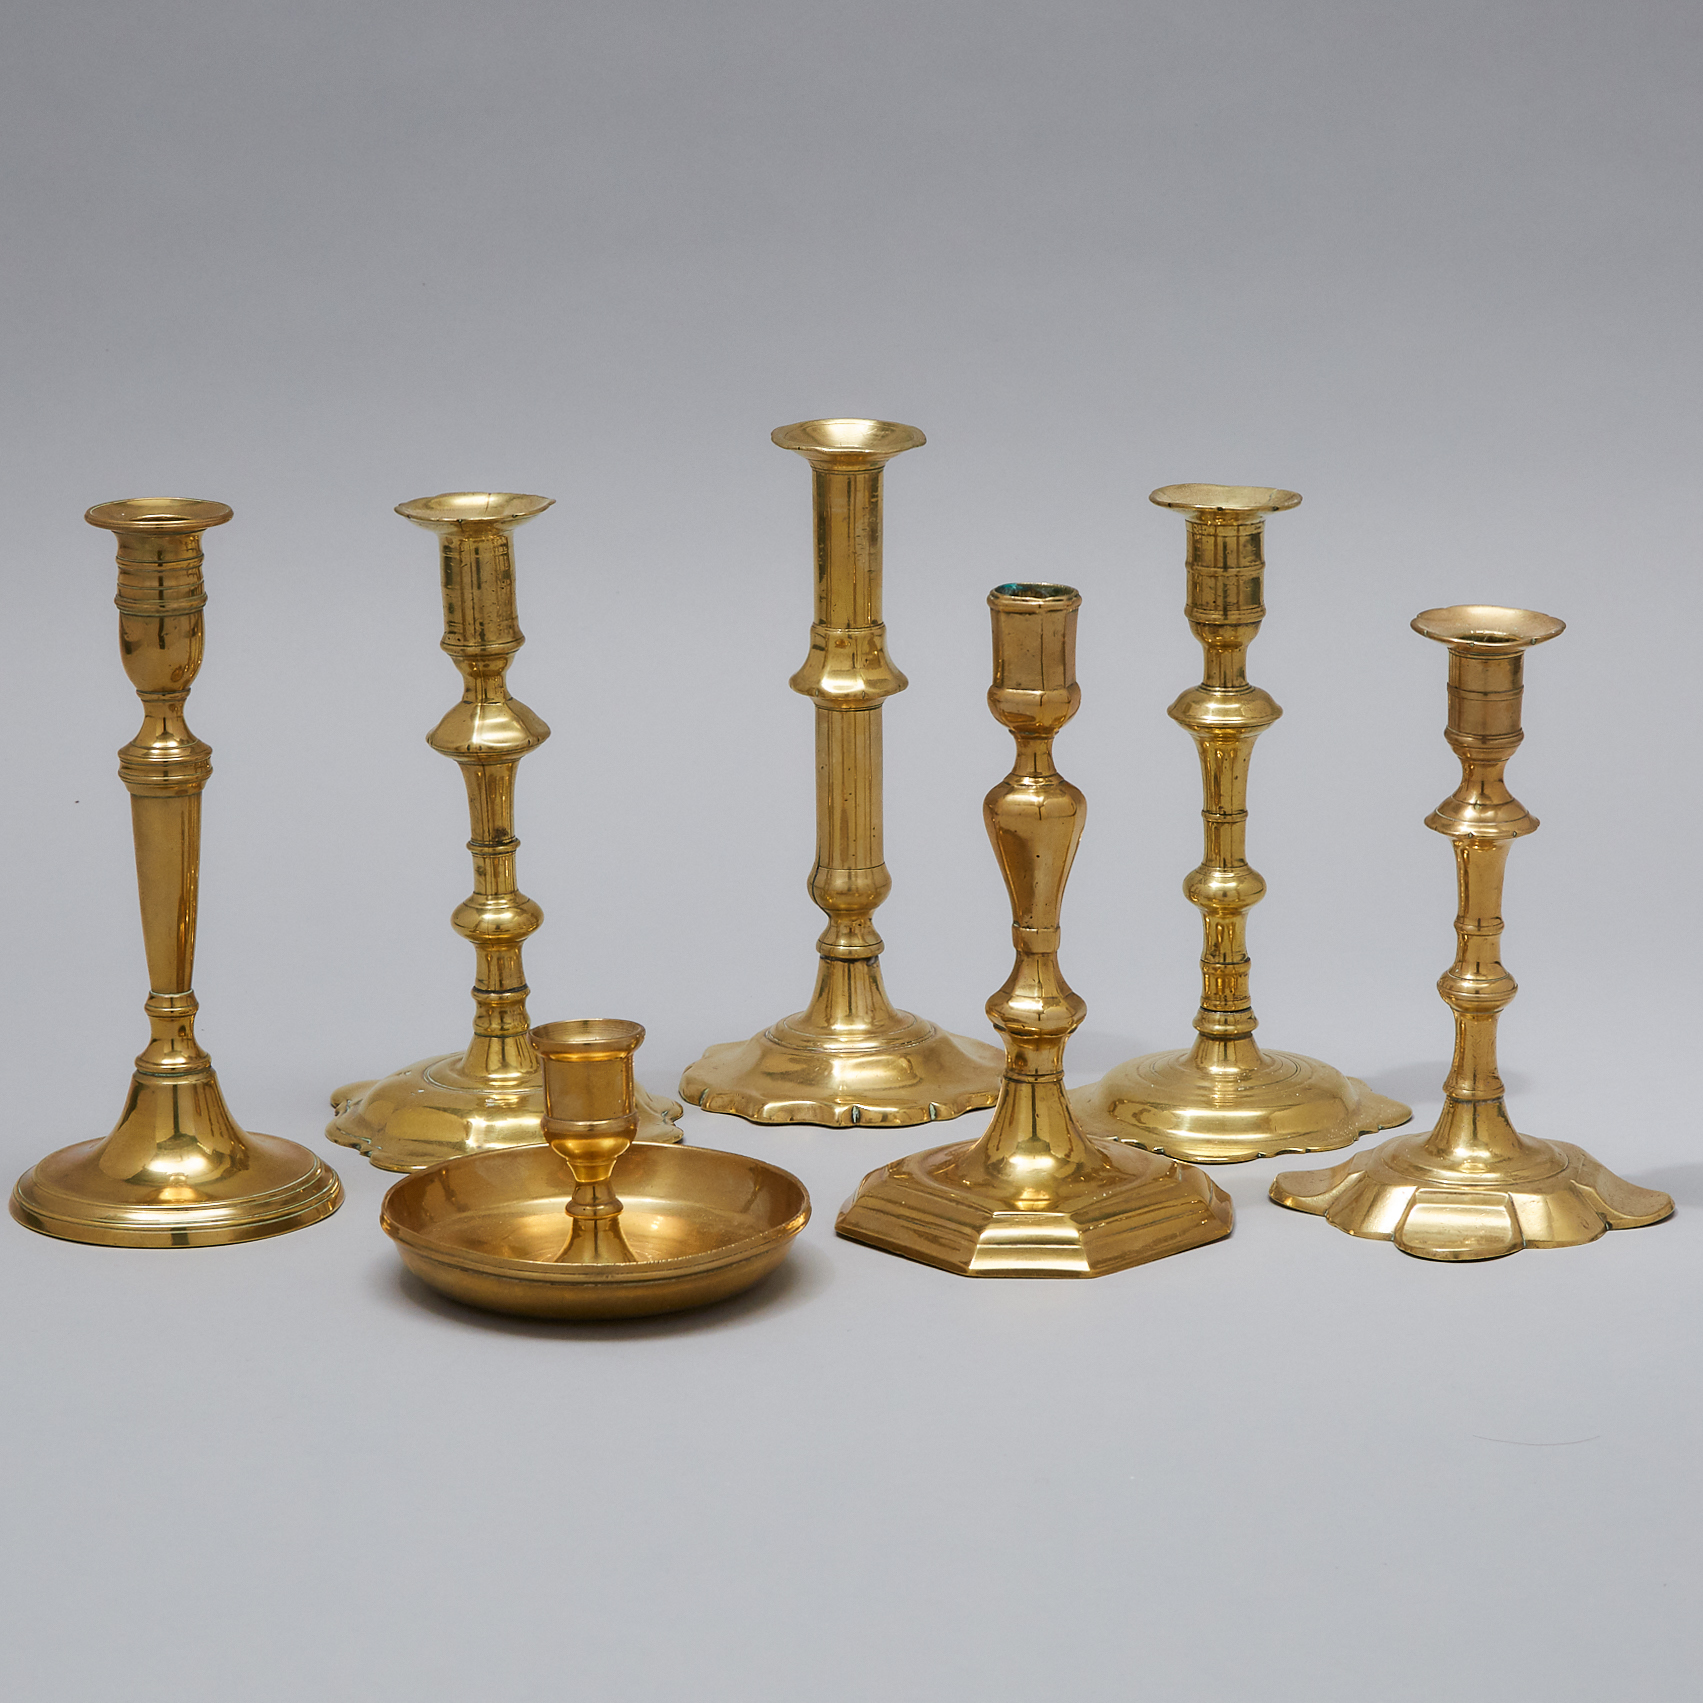 Six Mainly English Brass Candle Sticks and a Chamber Stick, early 18th century